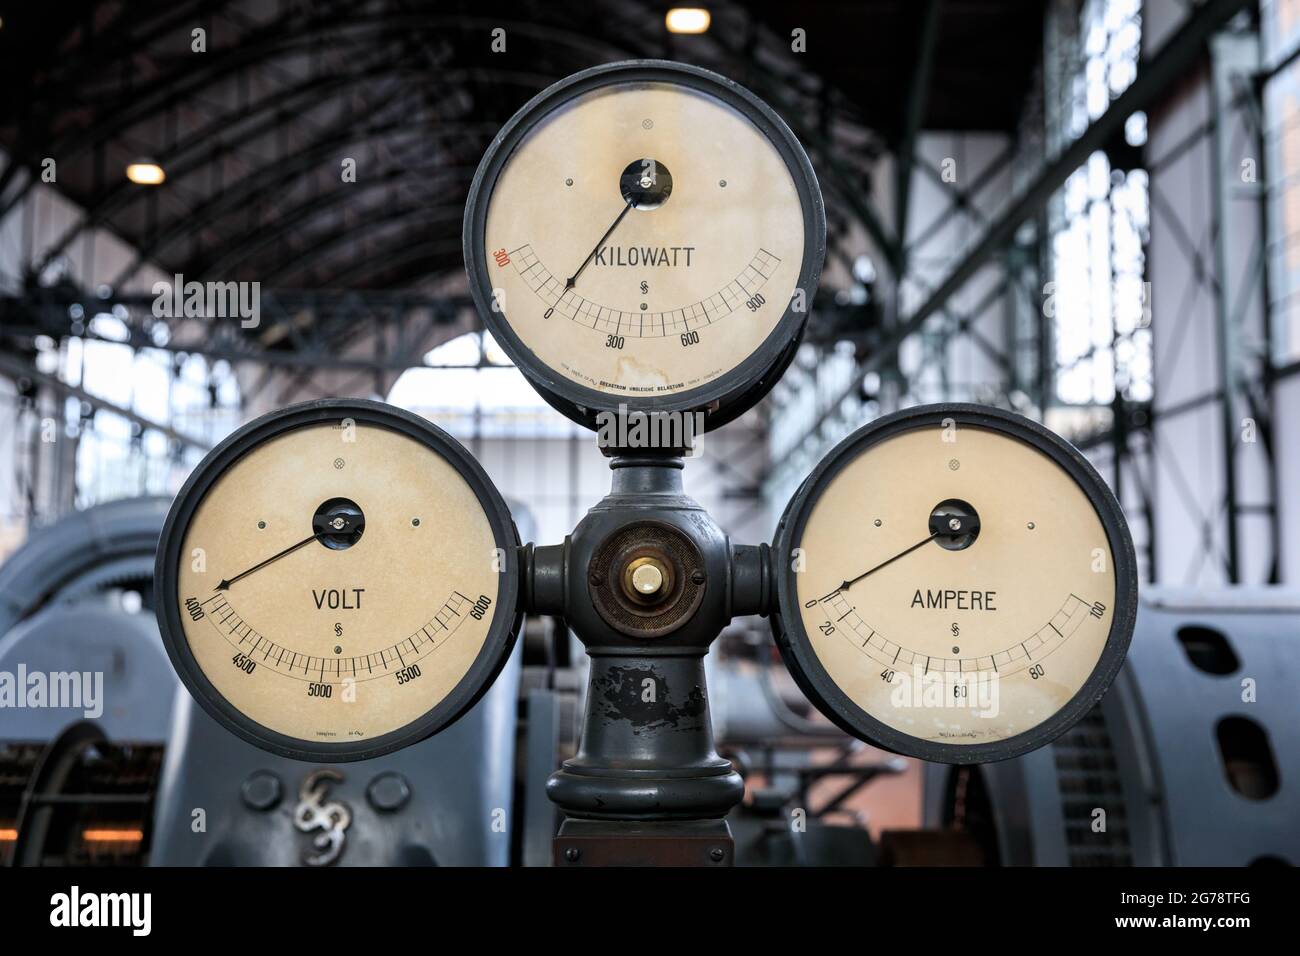 Old pressure meters for Volt, Kilowatt and Ampere in the machine hall at Zeche Zollern colliery, Dortmund, Germany Stock Photo